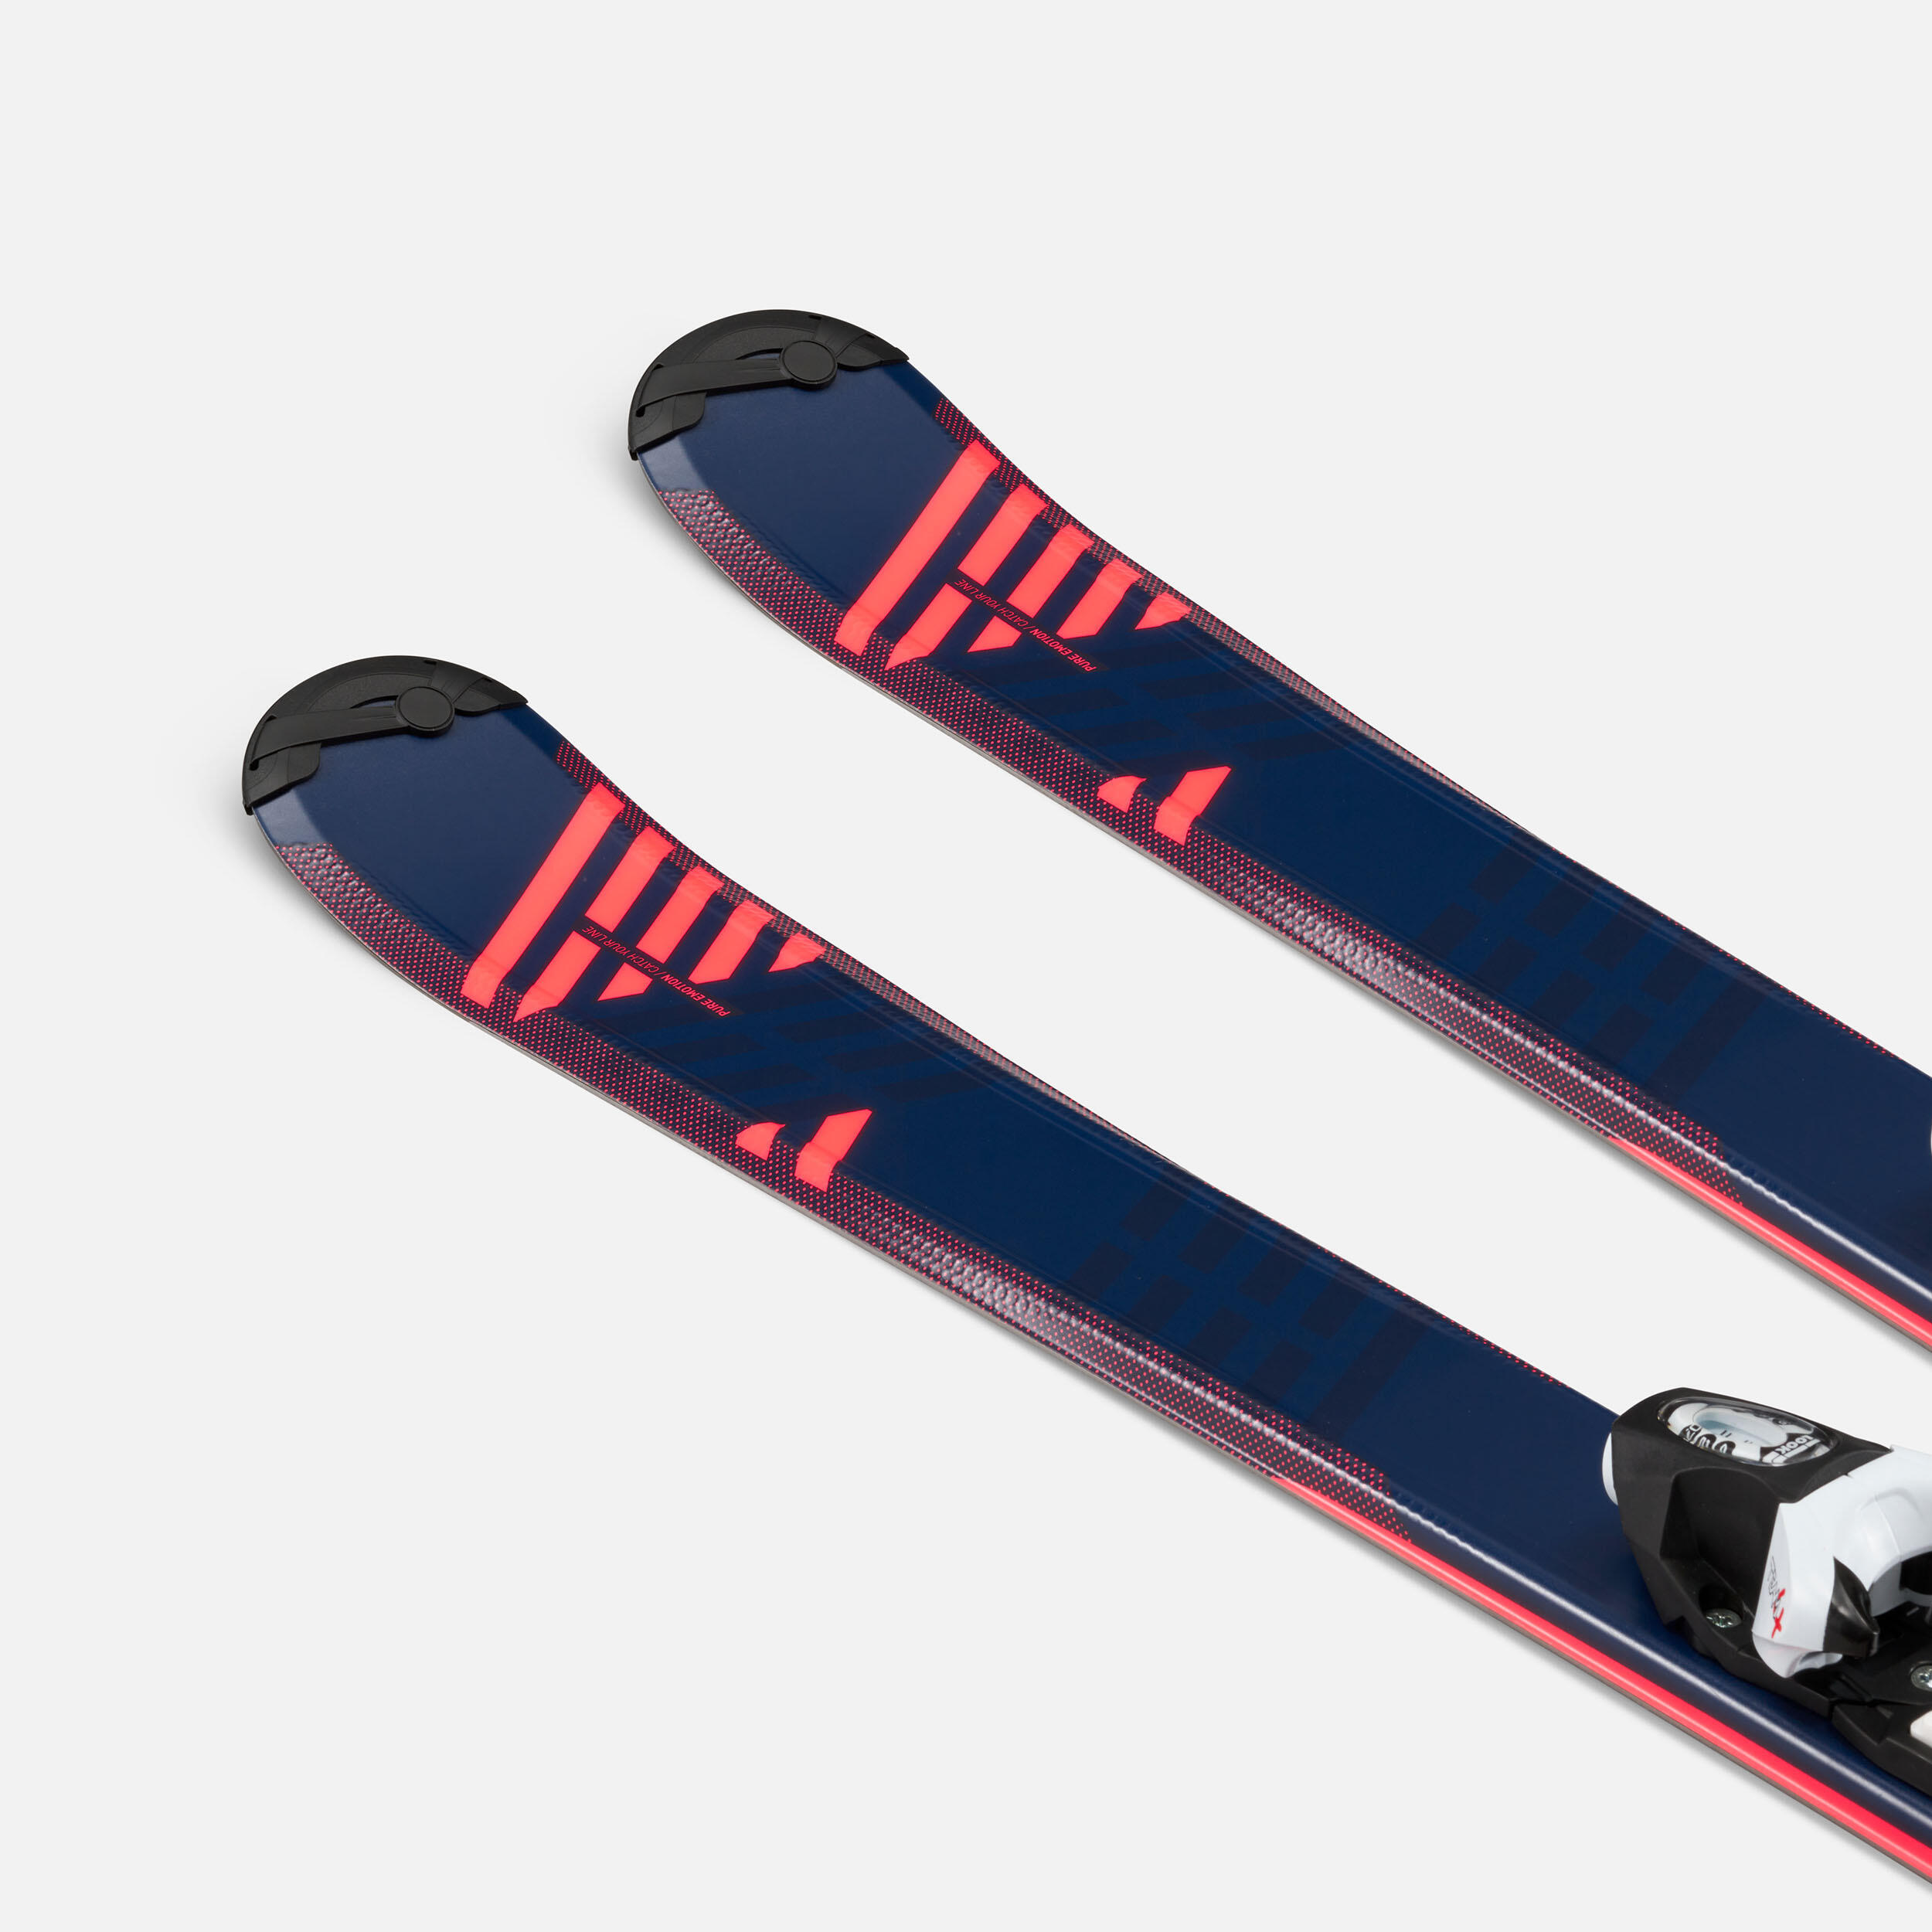 WOMEN’S DOWNHILL SKIS WITH BINDING - BOOST 500 - BLUE/PINK 3/11